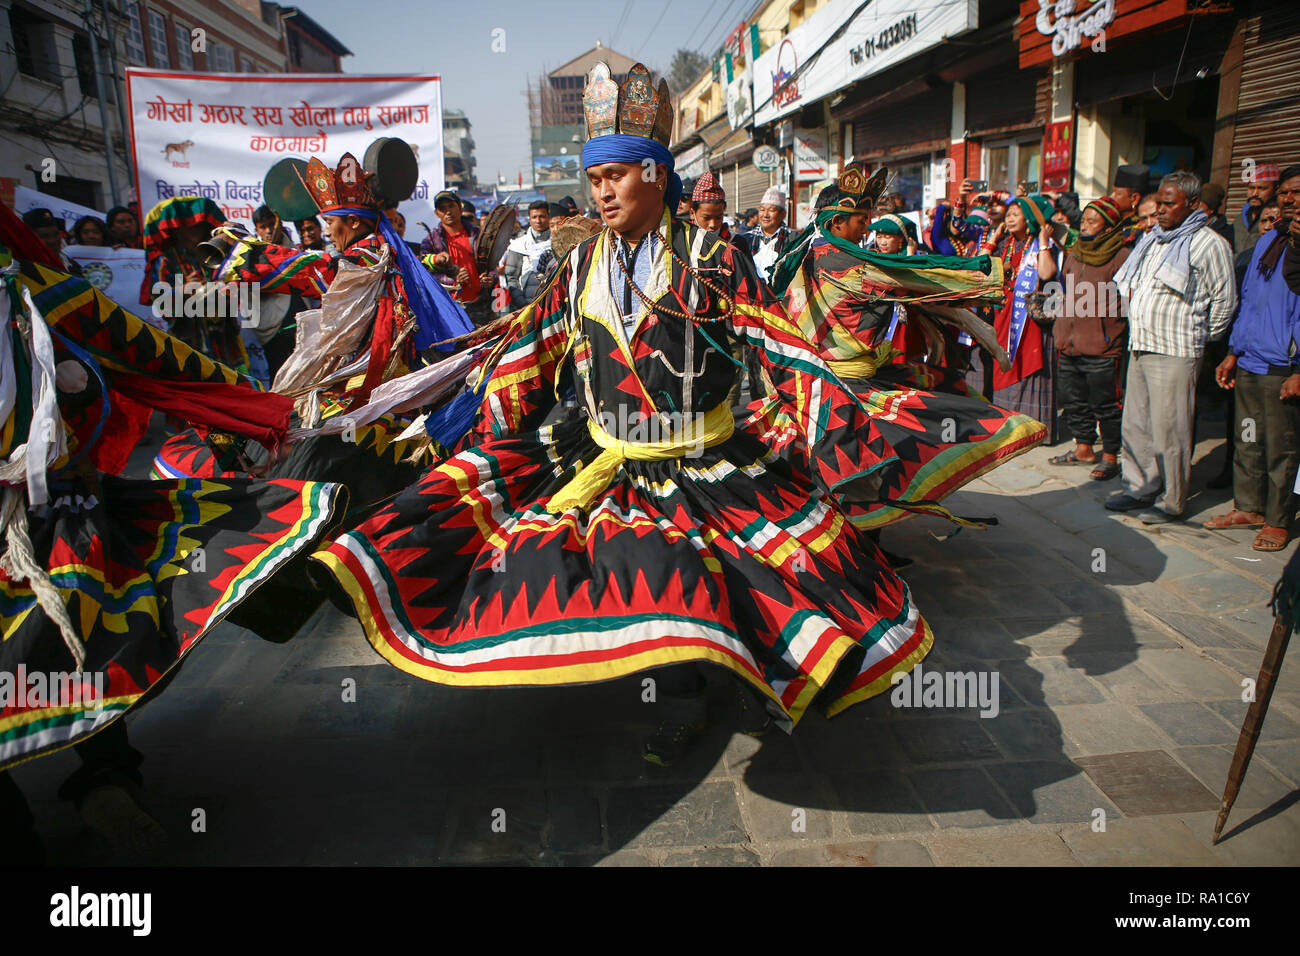 Nepalese men from ethnic Gurung community in traditional attire dance as they take part in parade to mark their New Year also known as Tamu Losar. The indigenous Gurungs, also known as Tamu, are celebrating the advent of the year of the deer. Stock Photo